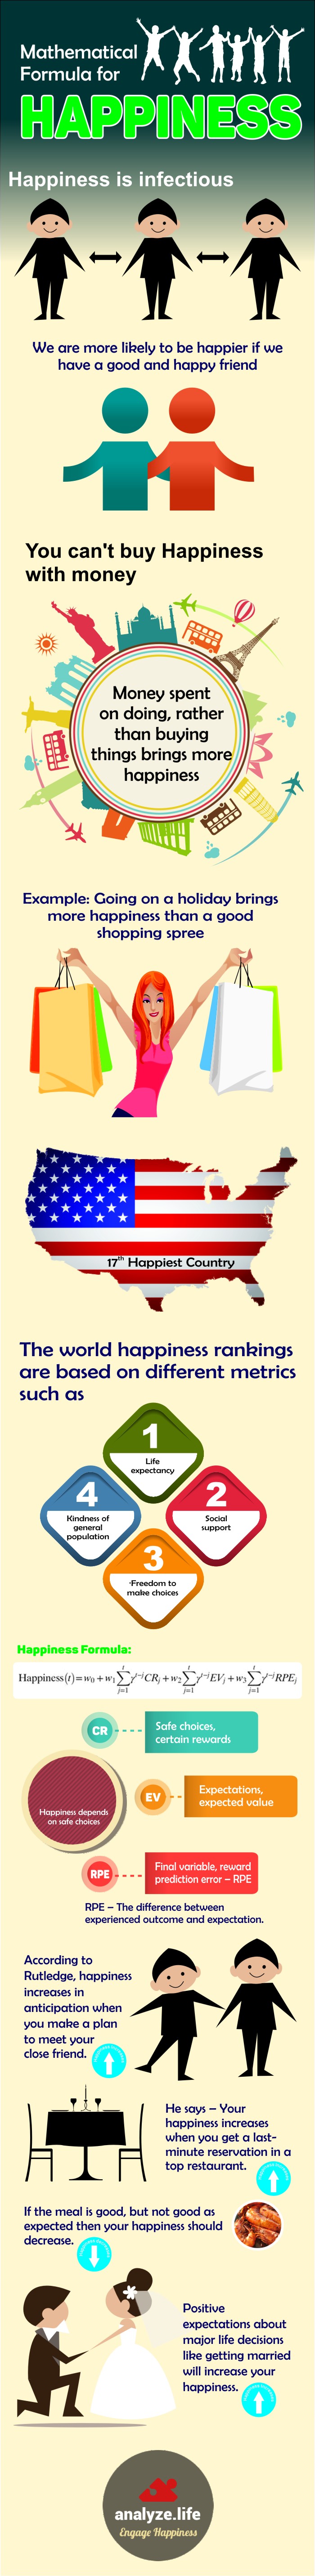 Mathematical Formula for Happiness Infographic